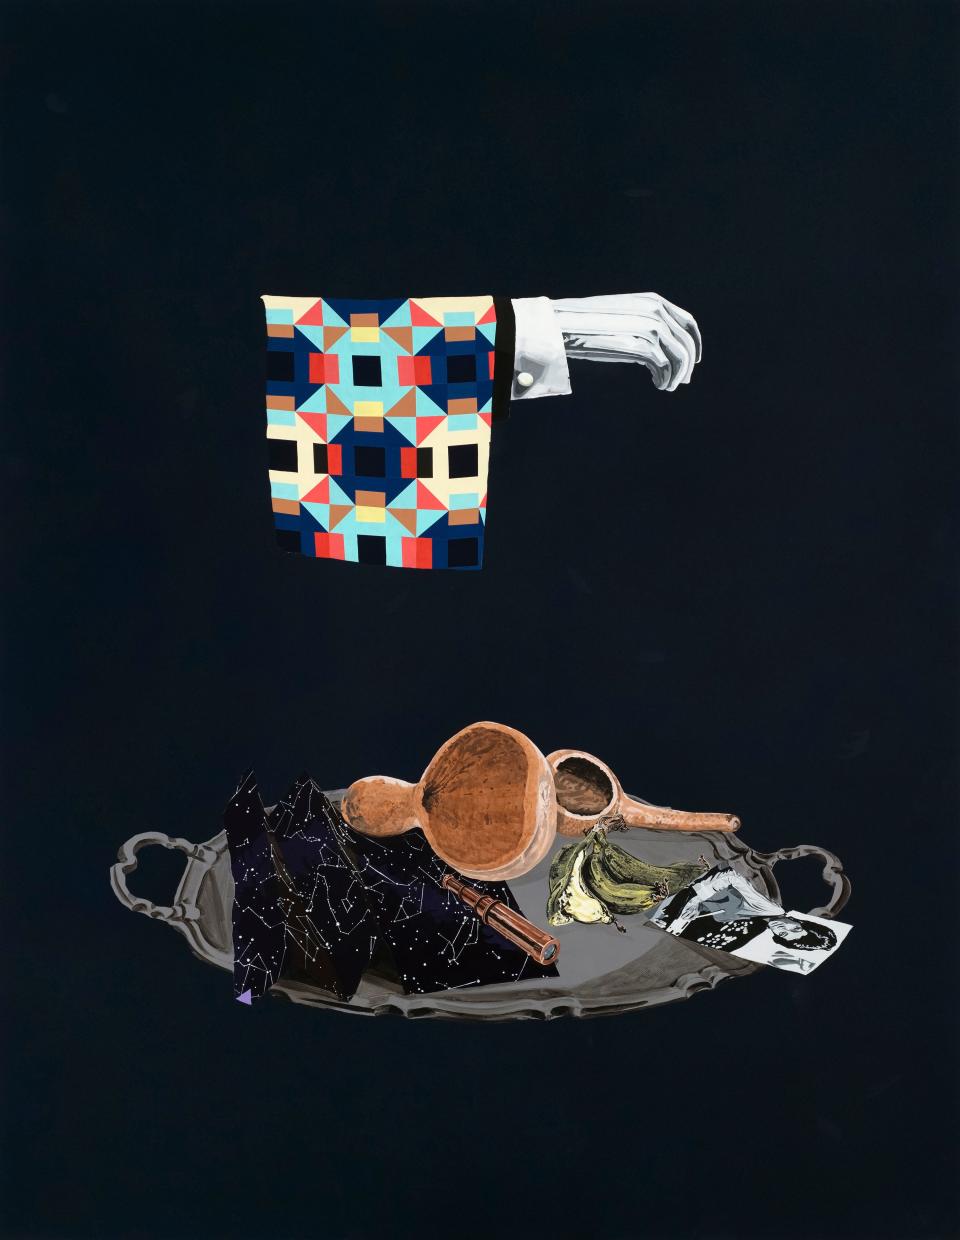 William Villalongo's 2021 “Still Life with Quilt and Drinking Gourds” is featured in The Ringling’s “Embodied” exhibition of works from its own collection that reflect on the human form.